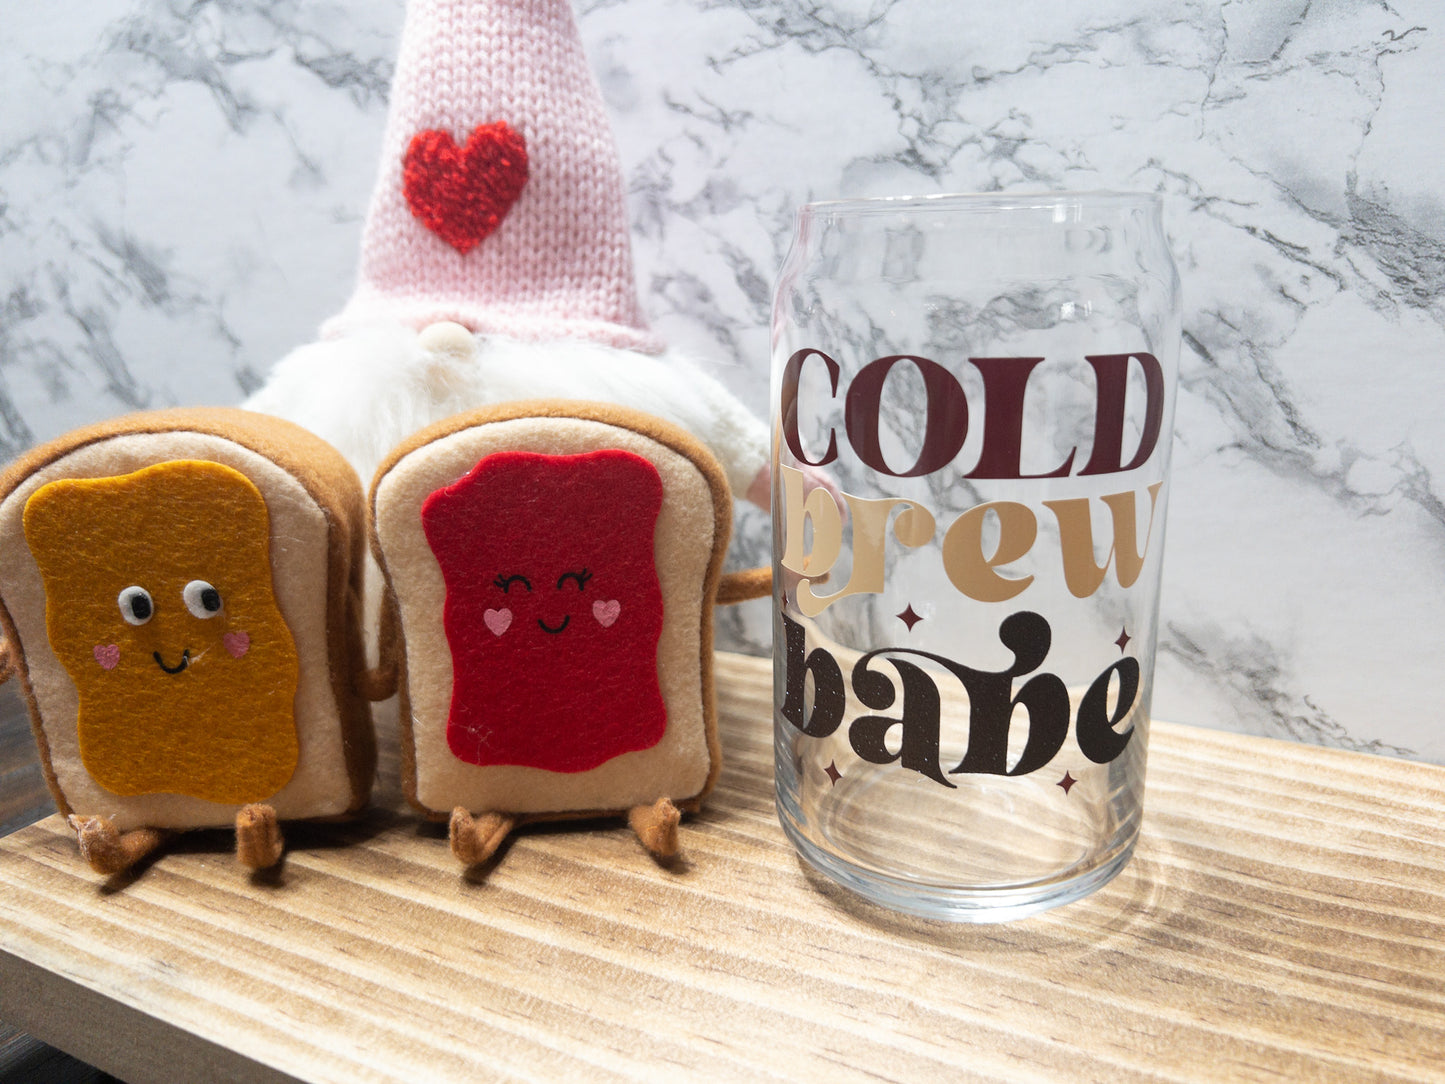 Cold Brew Babe Glass Can